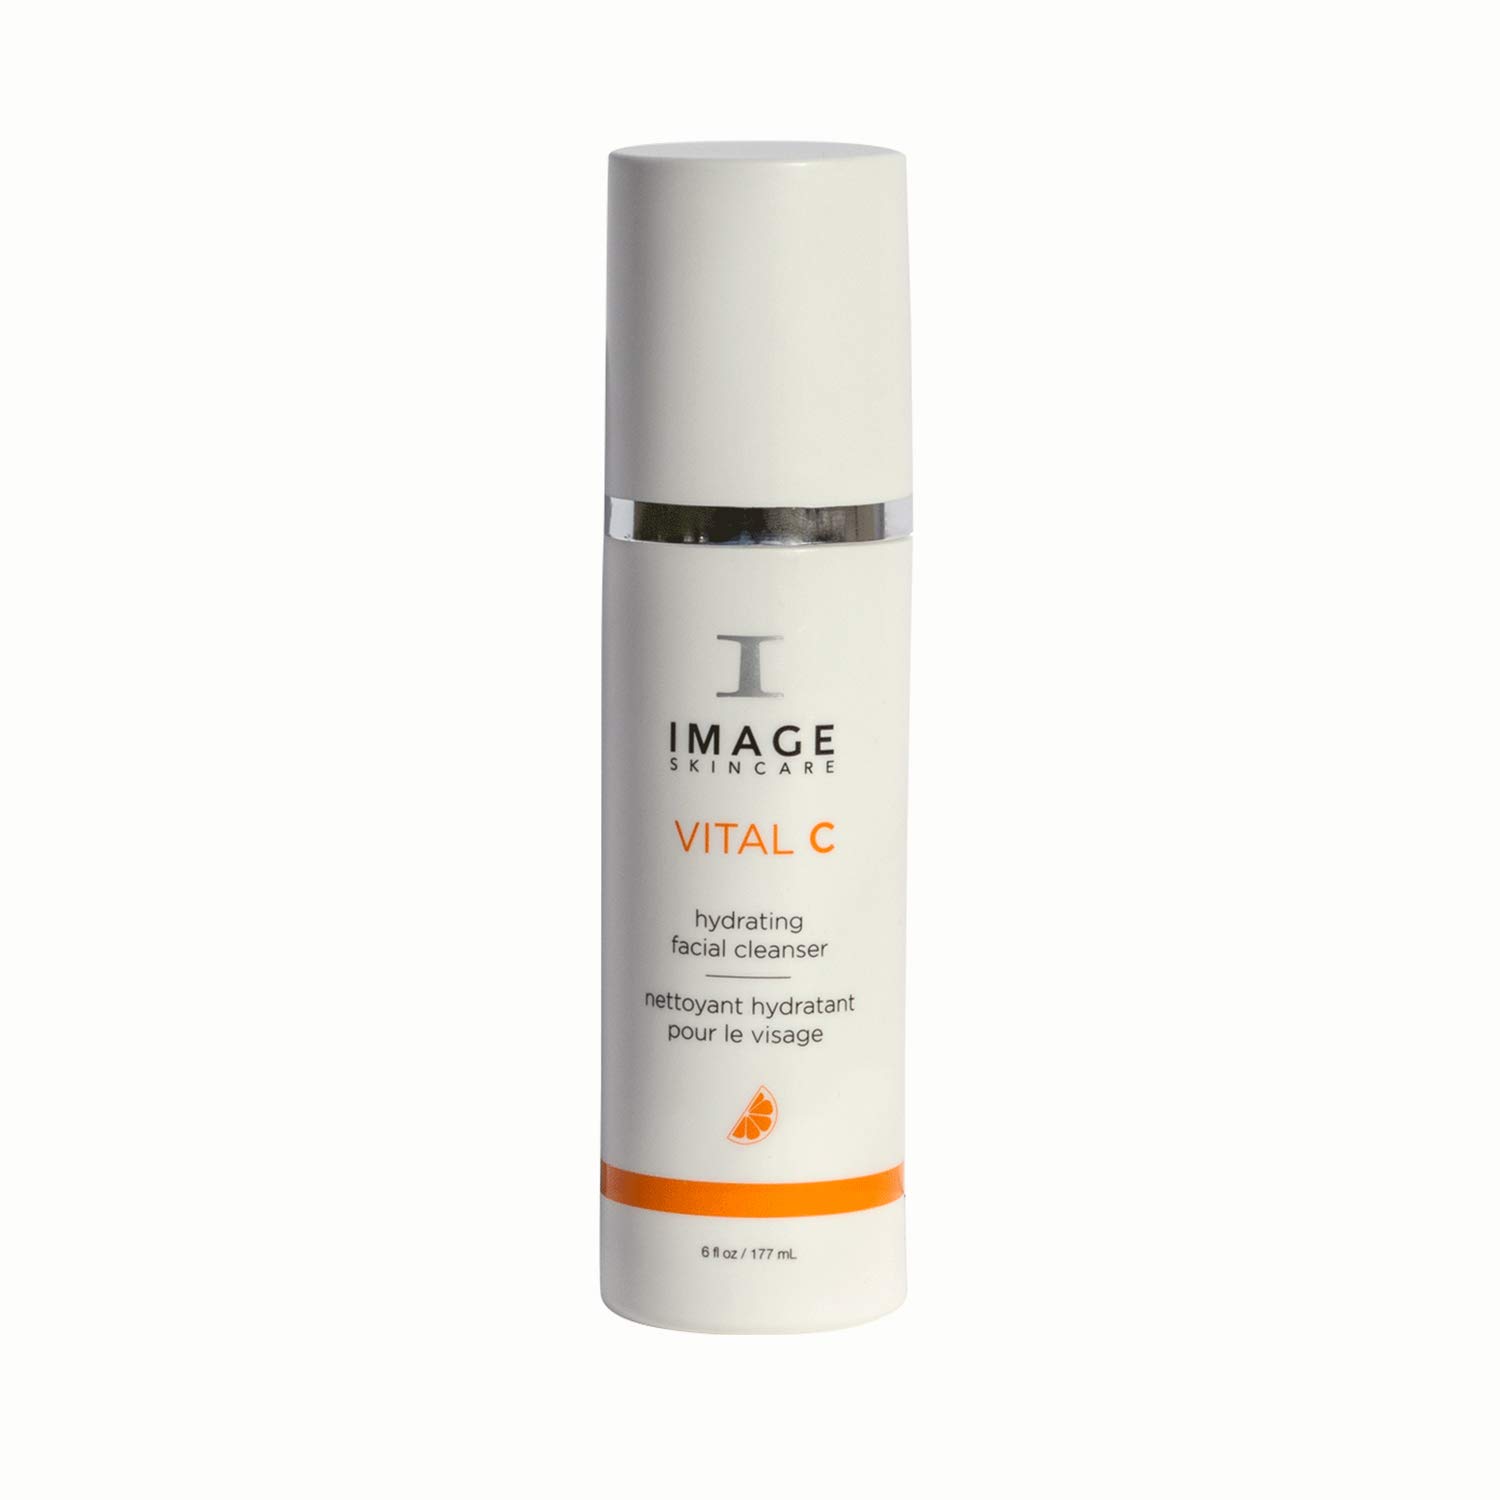 İmage Skincare Vital C Hydrating Facial Cleanser - 177 ml